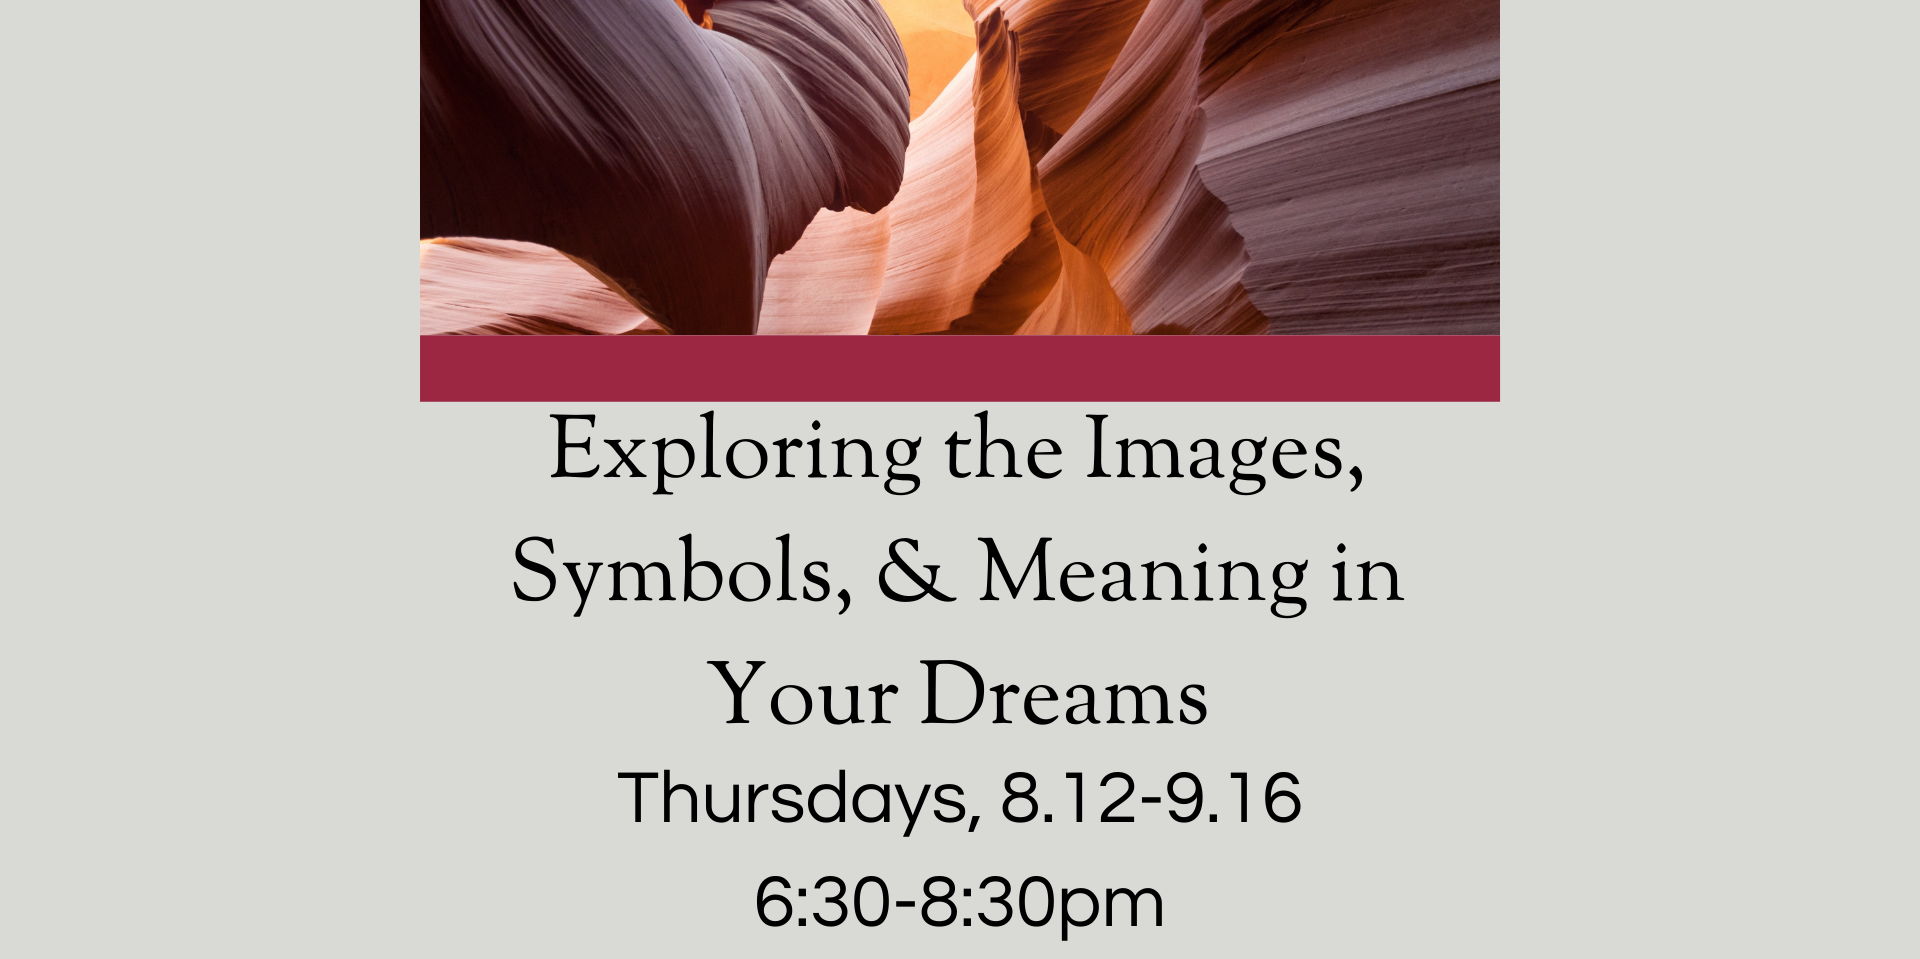 Exploring the Images, Symbols, & Meaning in Our Dreams promotional image